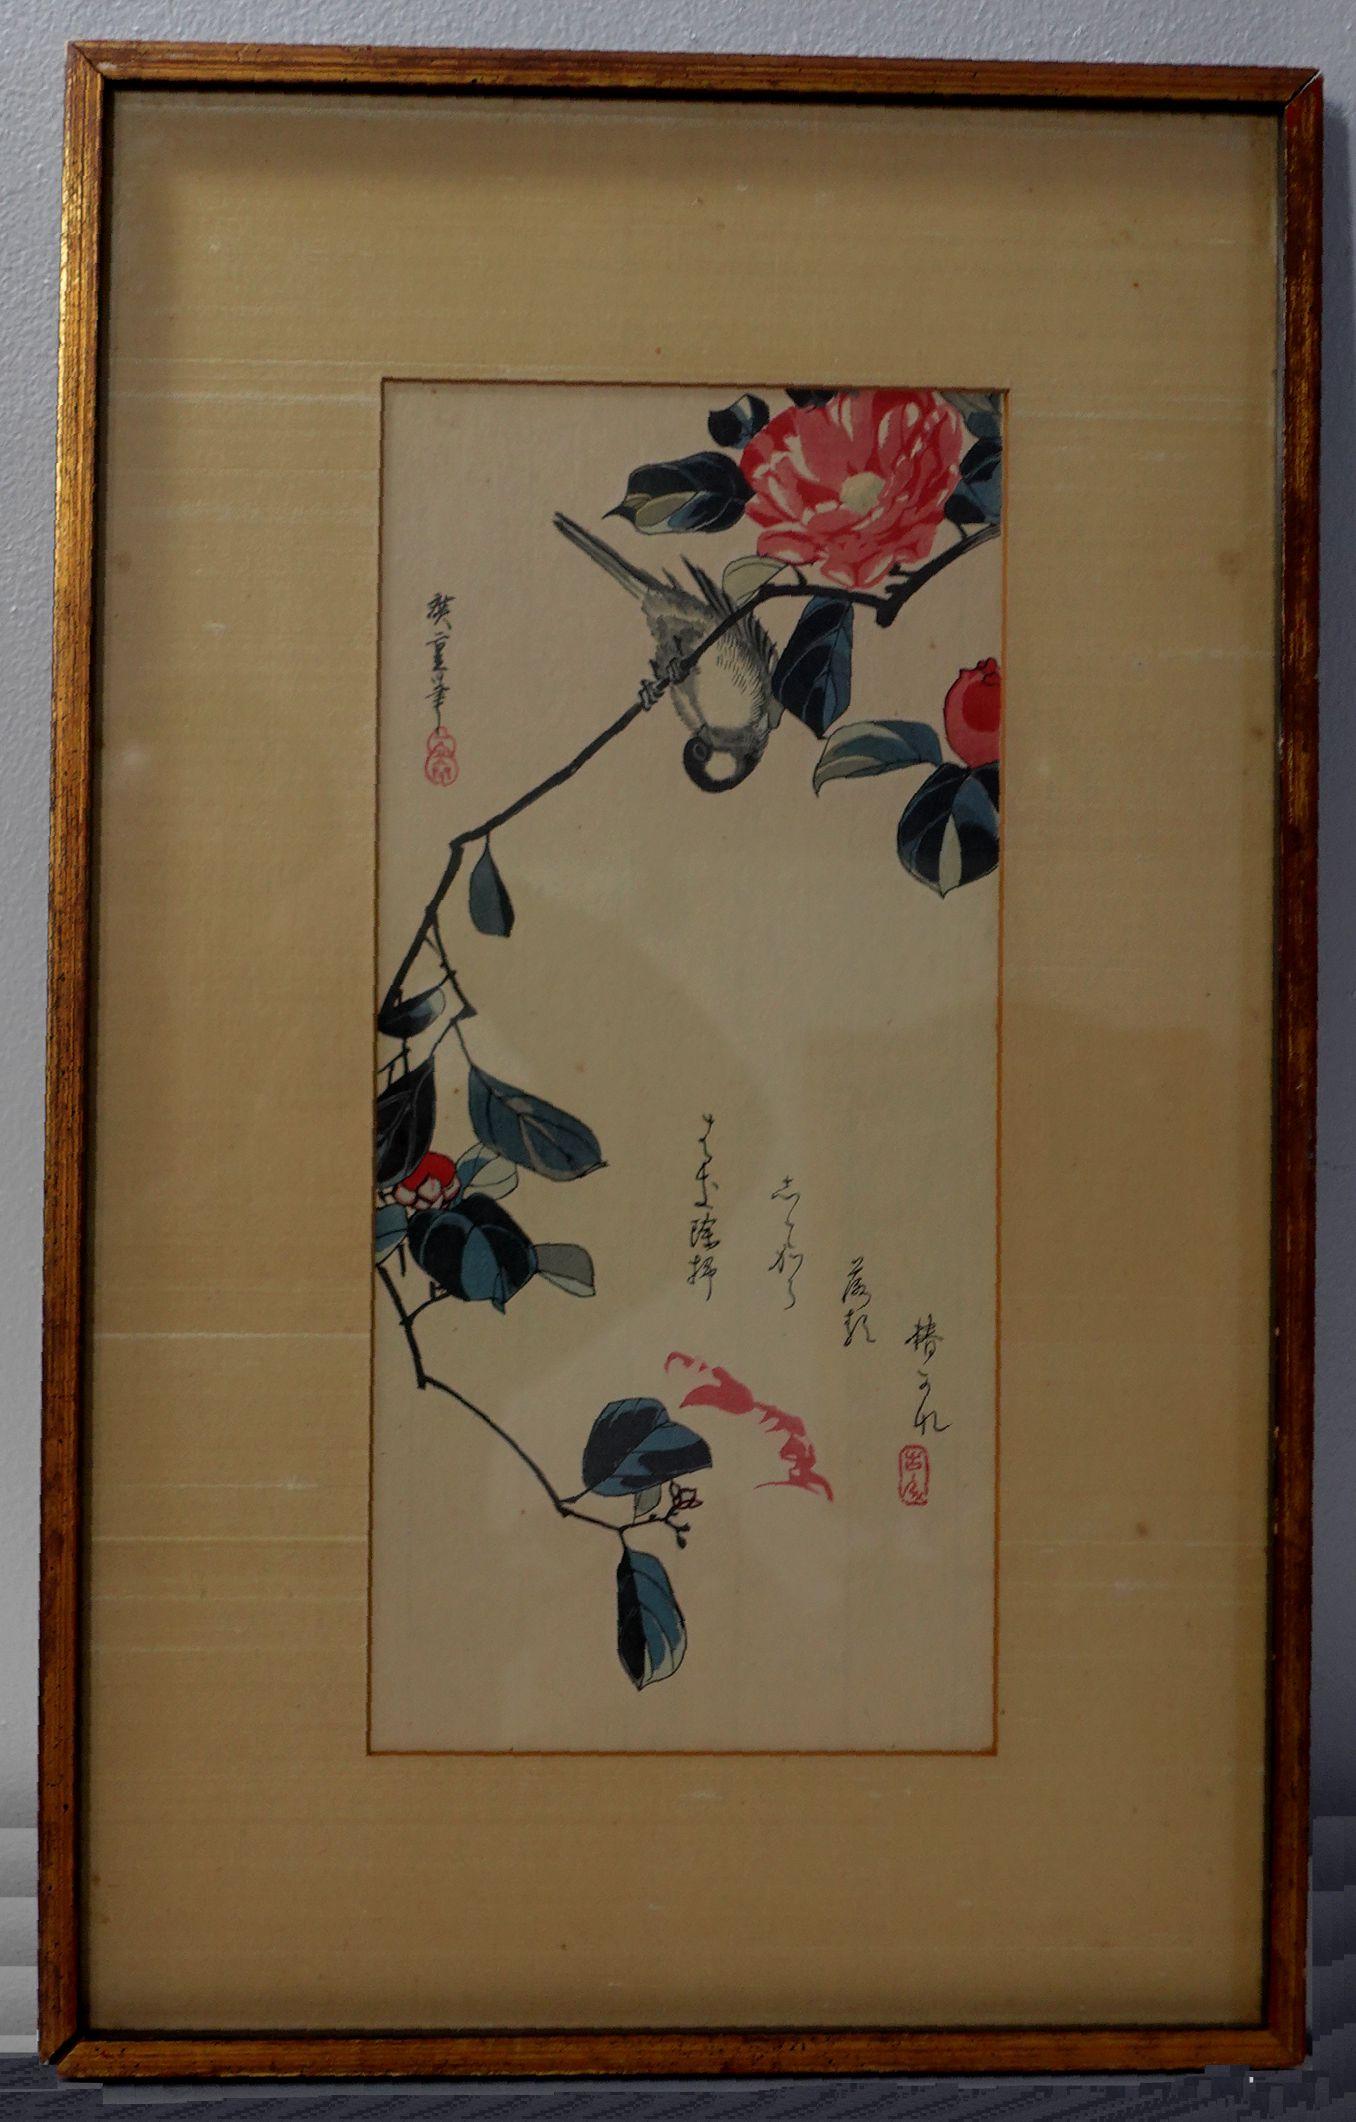 Utagawa Ando Hiroshige, Japanese, 1797 to 1858, woodblock prints on paper, Flowers and Bird signed and inscribed in Hieroglyphs and red ink stamp upper left and lower right and framed in Toyko, Japan.
Utagawa Hiroshige, born Ando Tokutaro, was a